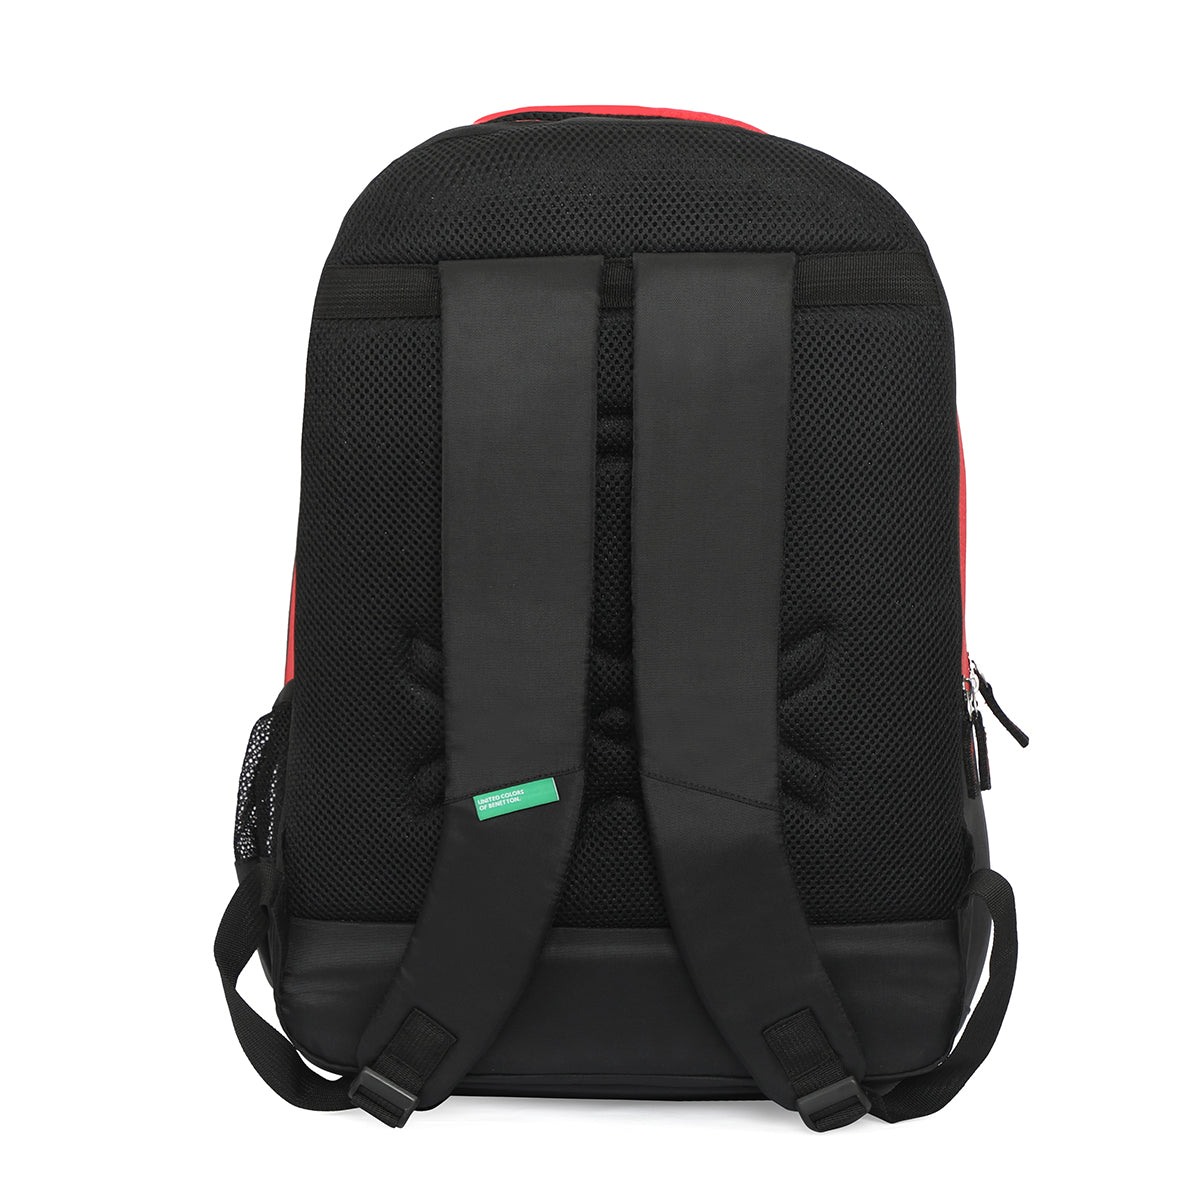 United Colors of Benetton Provence  Non Laptop Backpack-Red